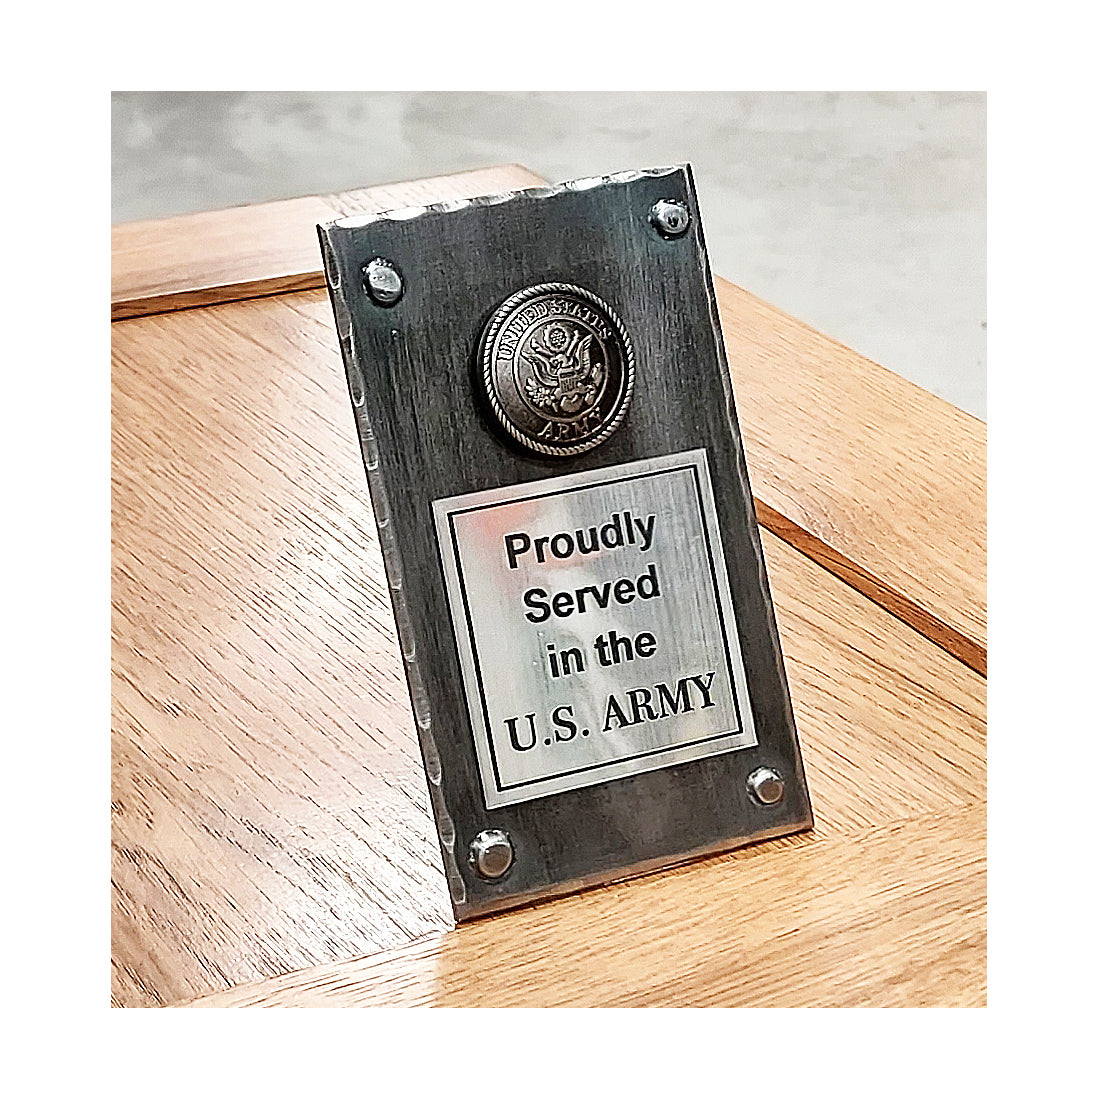 Veteran Gift, US ARMY Vet Gift - Desk Plaque with US ARMY Emblem, Metal Art, Patriotic Gift